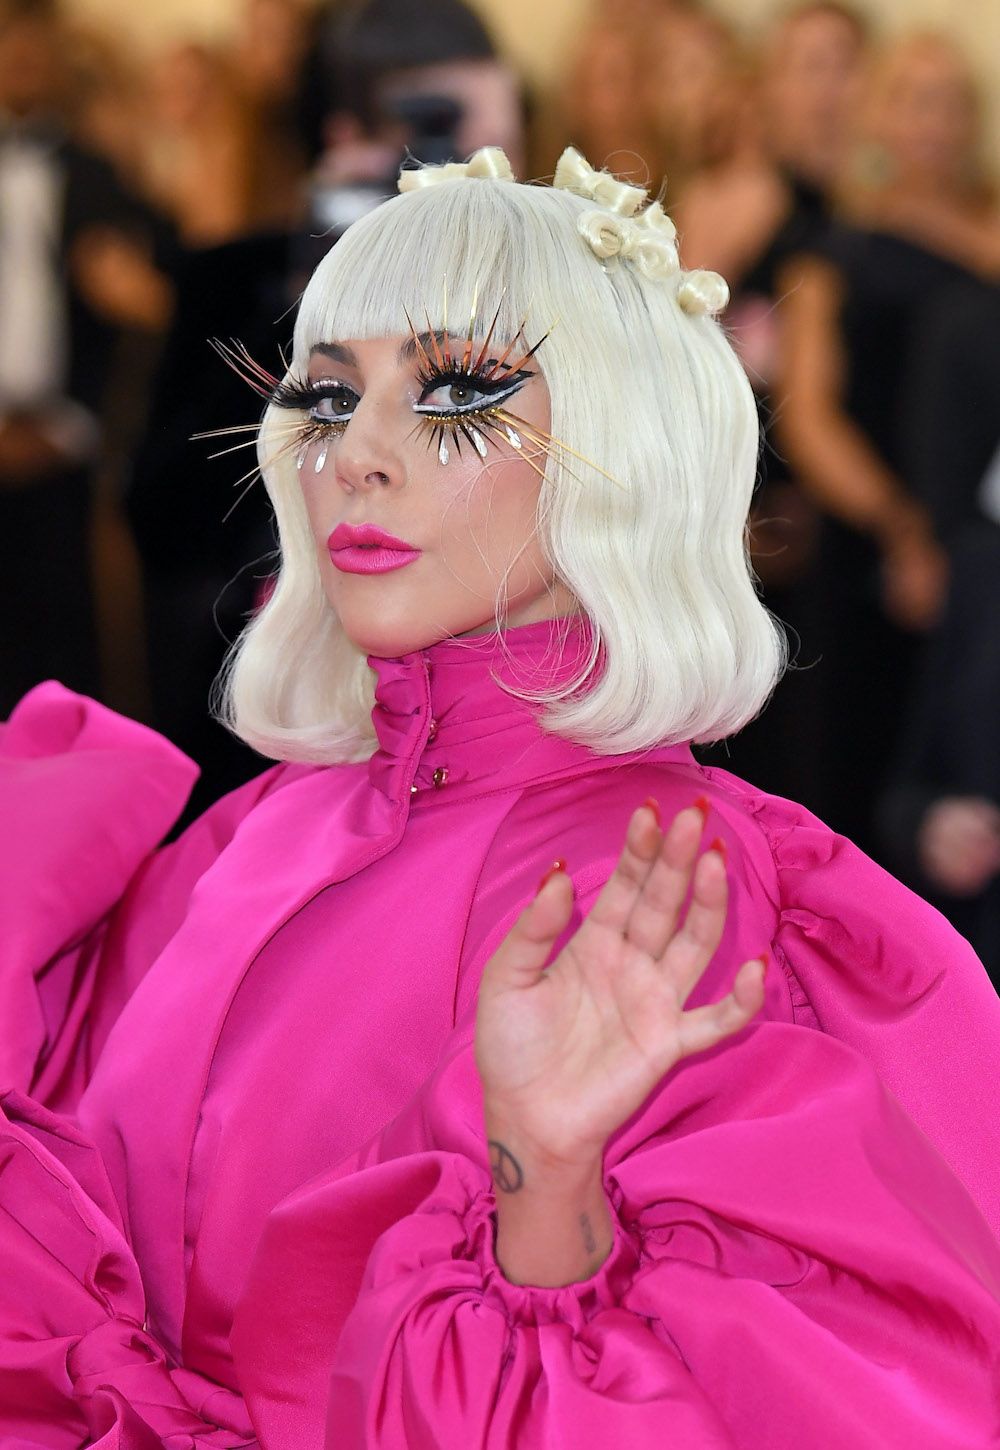 <p>                     This was one of the most memorable Met Gala looks of all time, seen at 2019's "Camp: Notes on Fashion". Lady Gaga had multiple outfit changes on the red carpet and, when she removed her oversized sunglasses, revealed these incredibly detailed statement lashes, complete with graphic liner and a fuchsia lip to match her dress.                   </p>